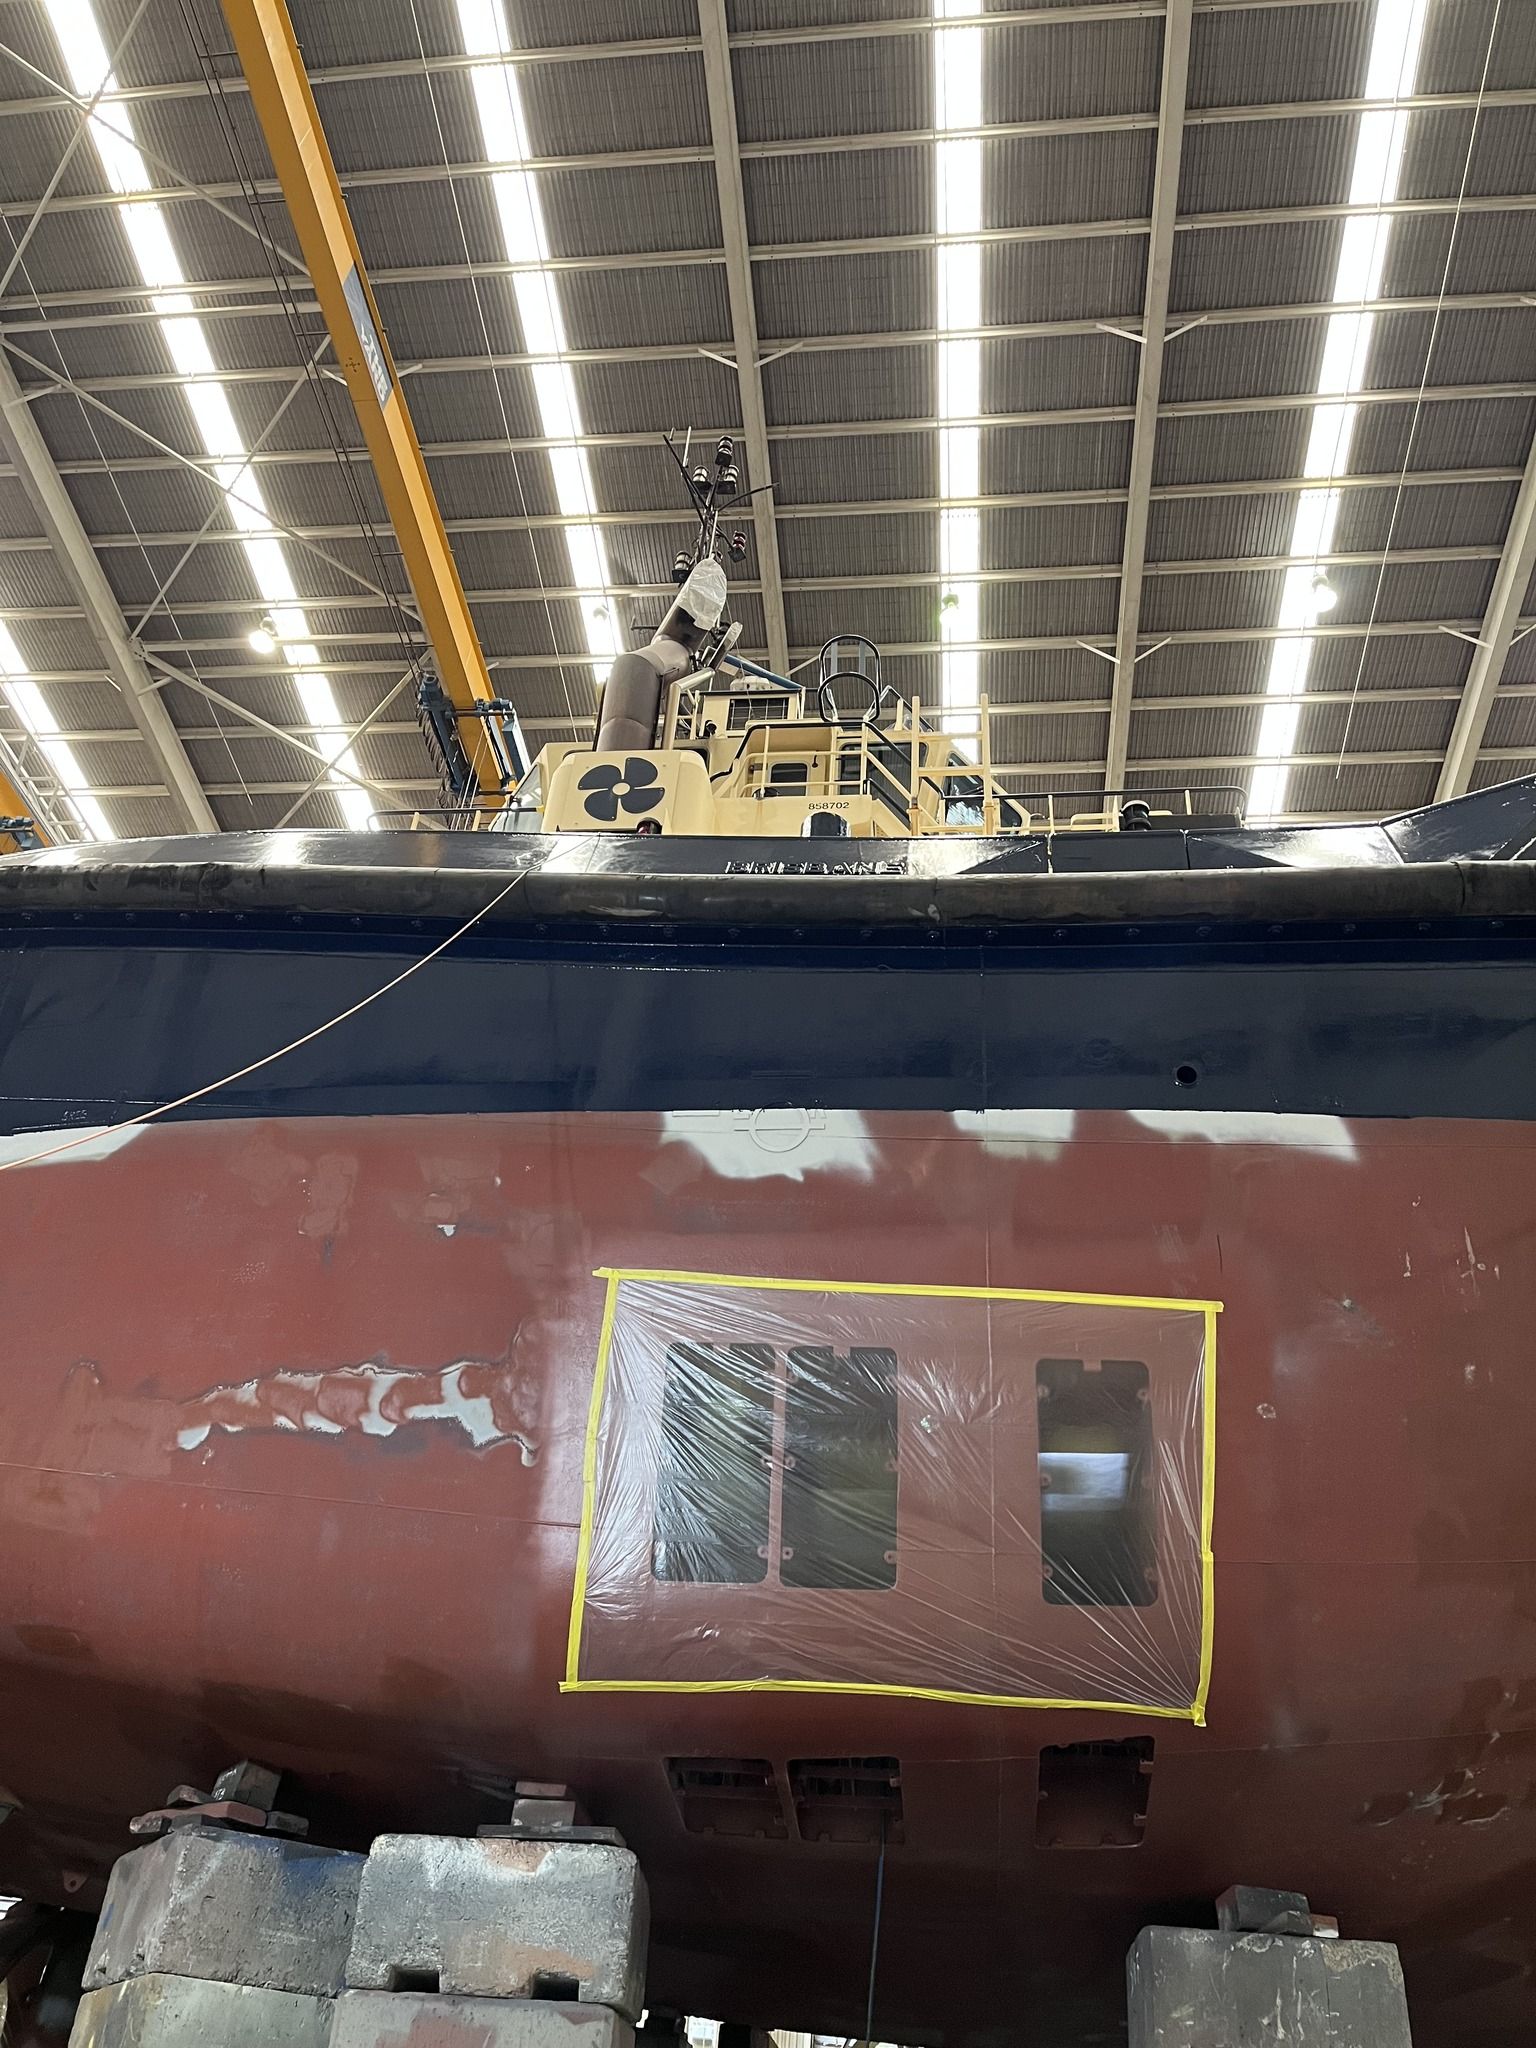 marine refit services, marine window repairs, marine window replacements, marine window maintenance, replacement marine windows, boat window repairs and replacements